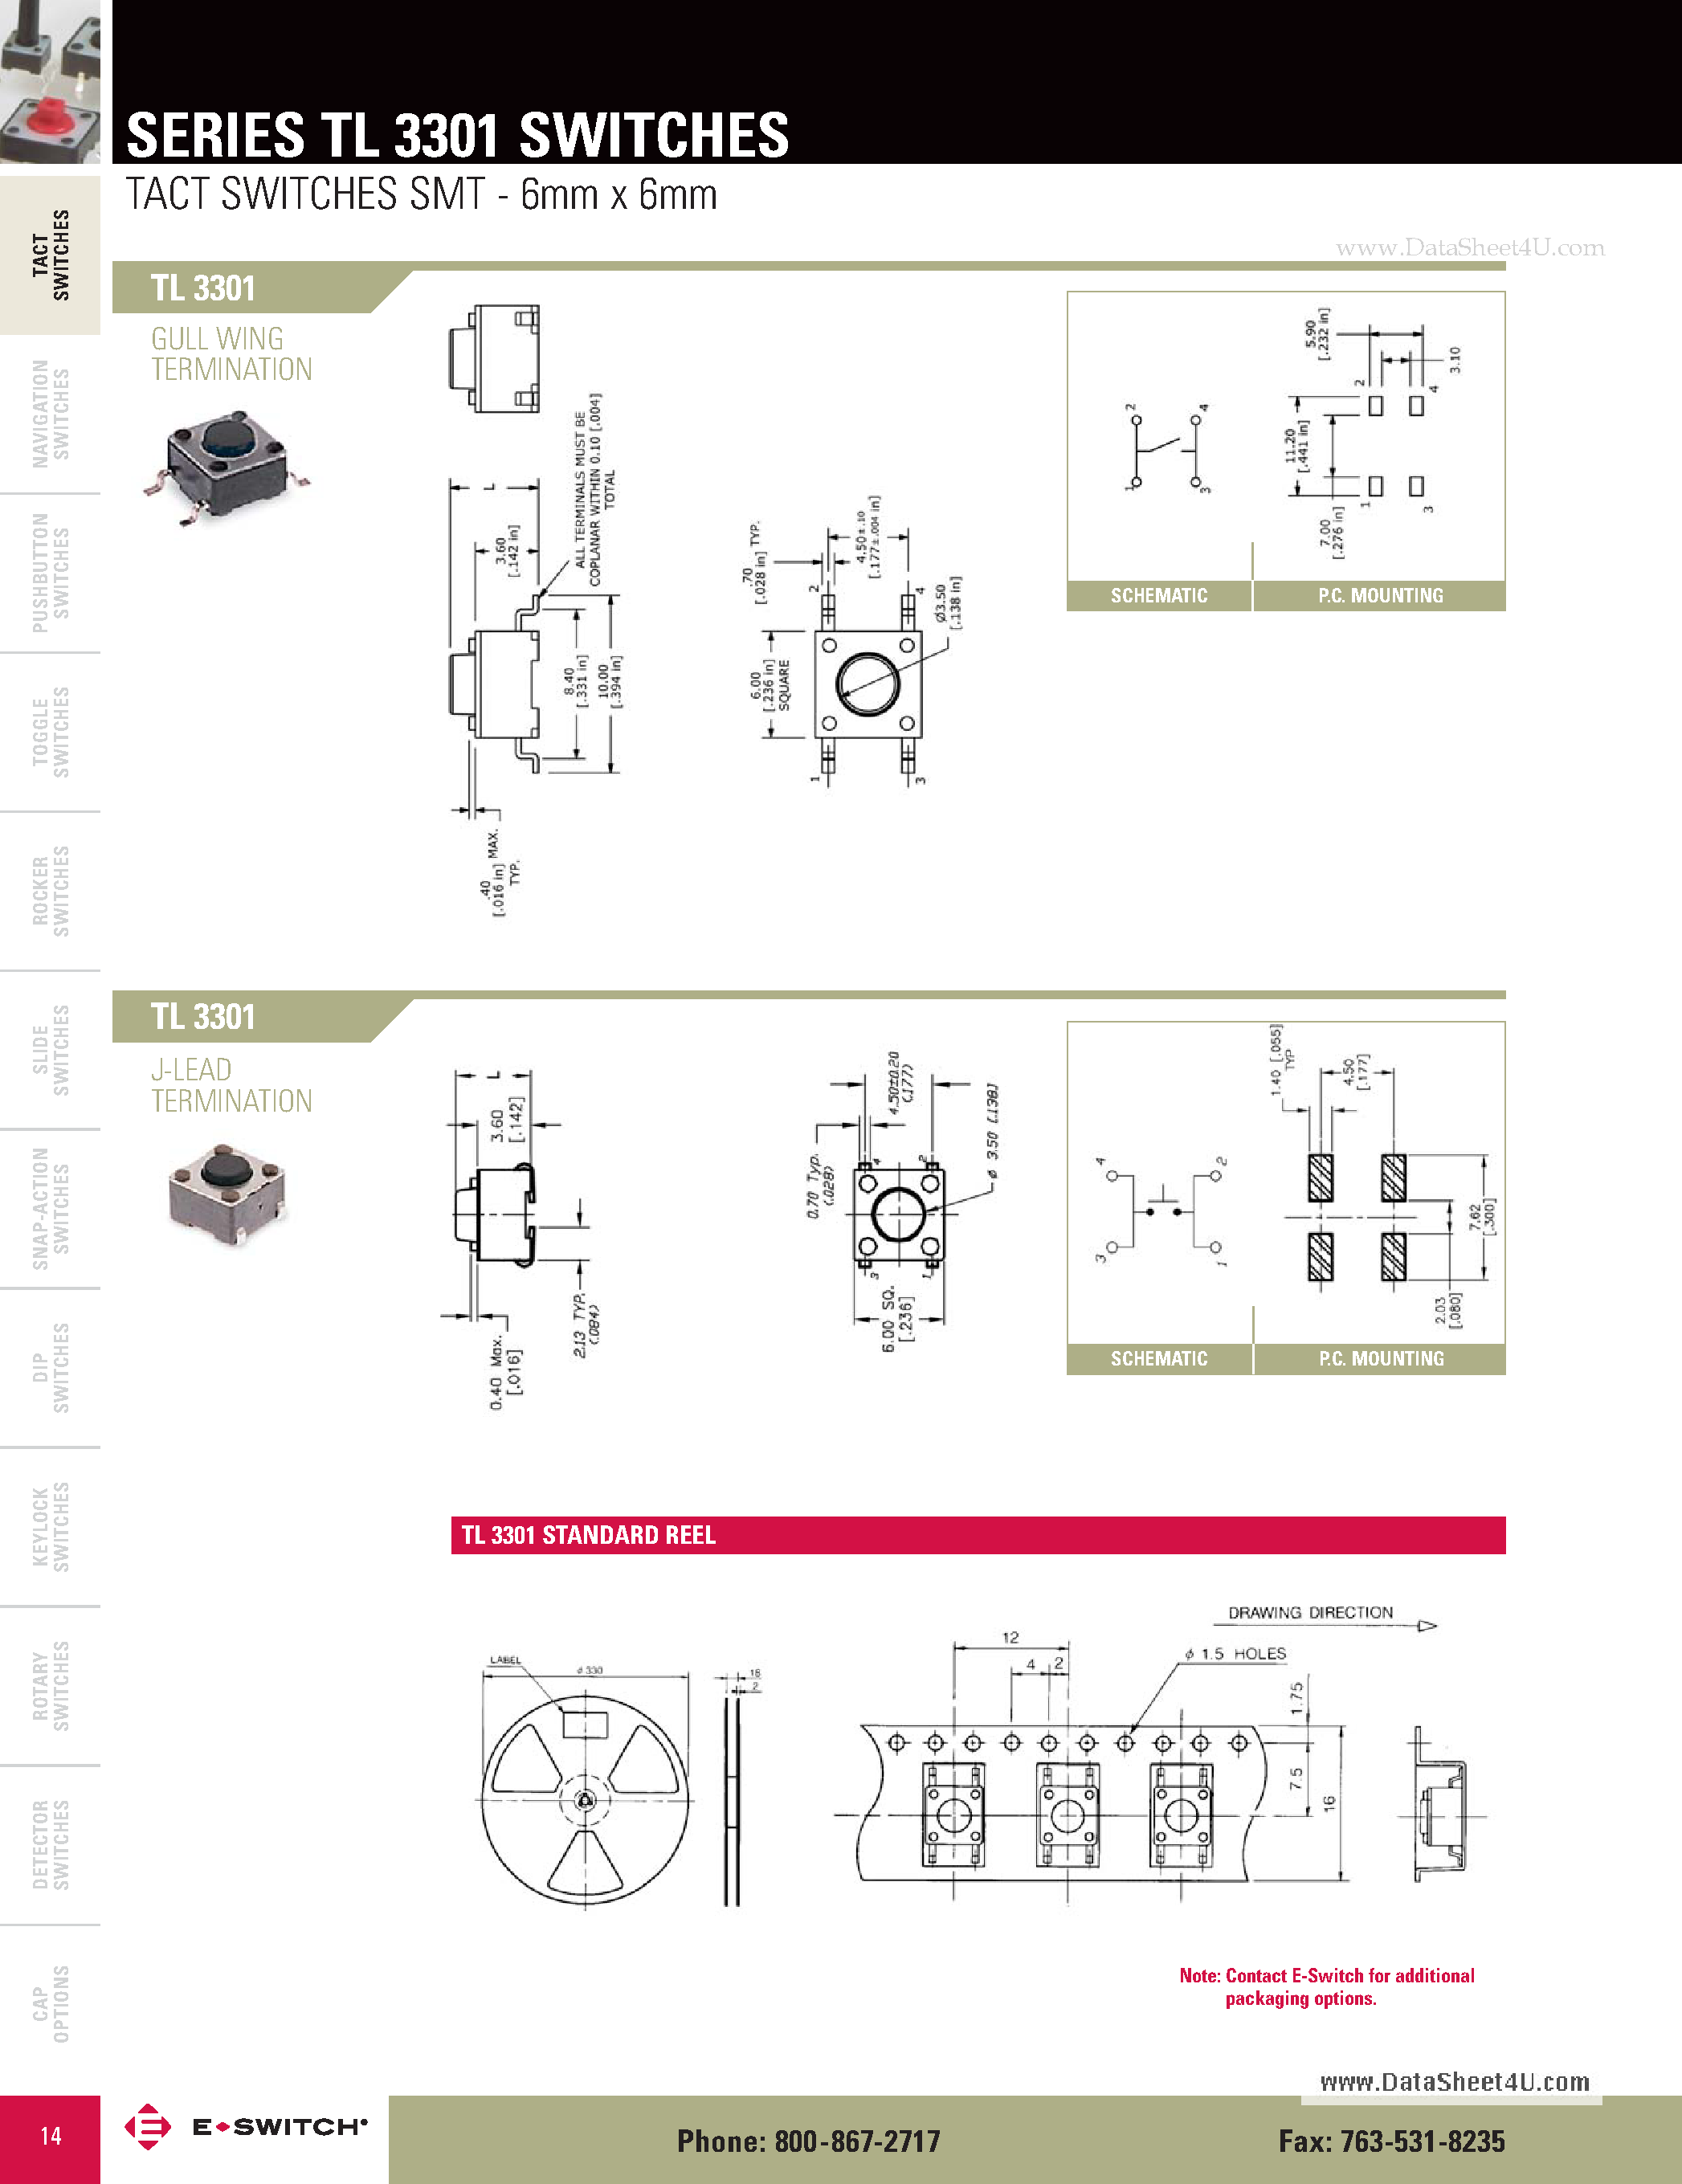 Datasheet TL3301 - TACT SWITCHES SMT page 2